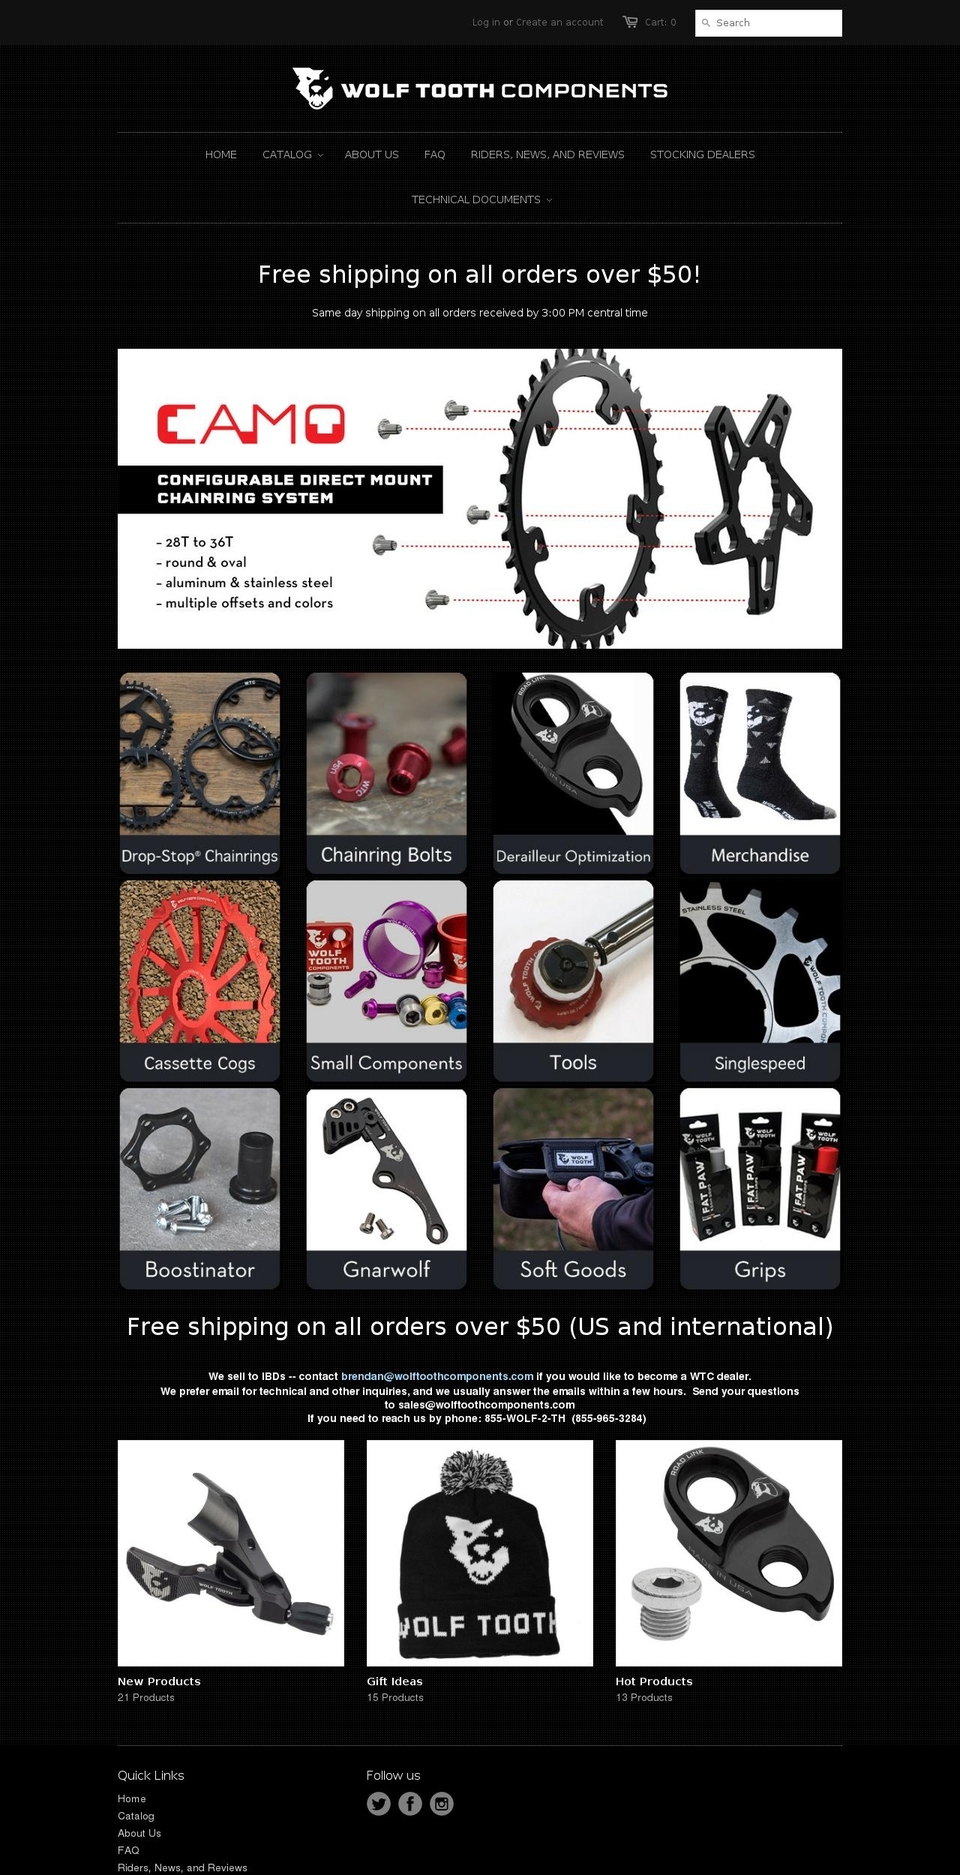 wolftoothcomponents.com shopify website screenshot